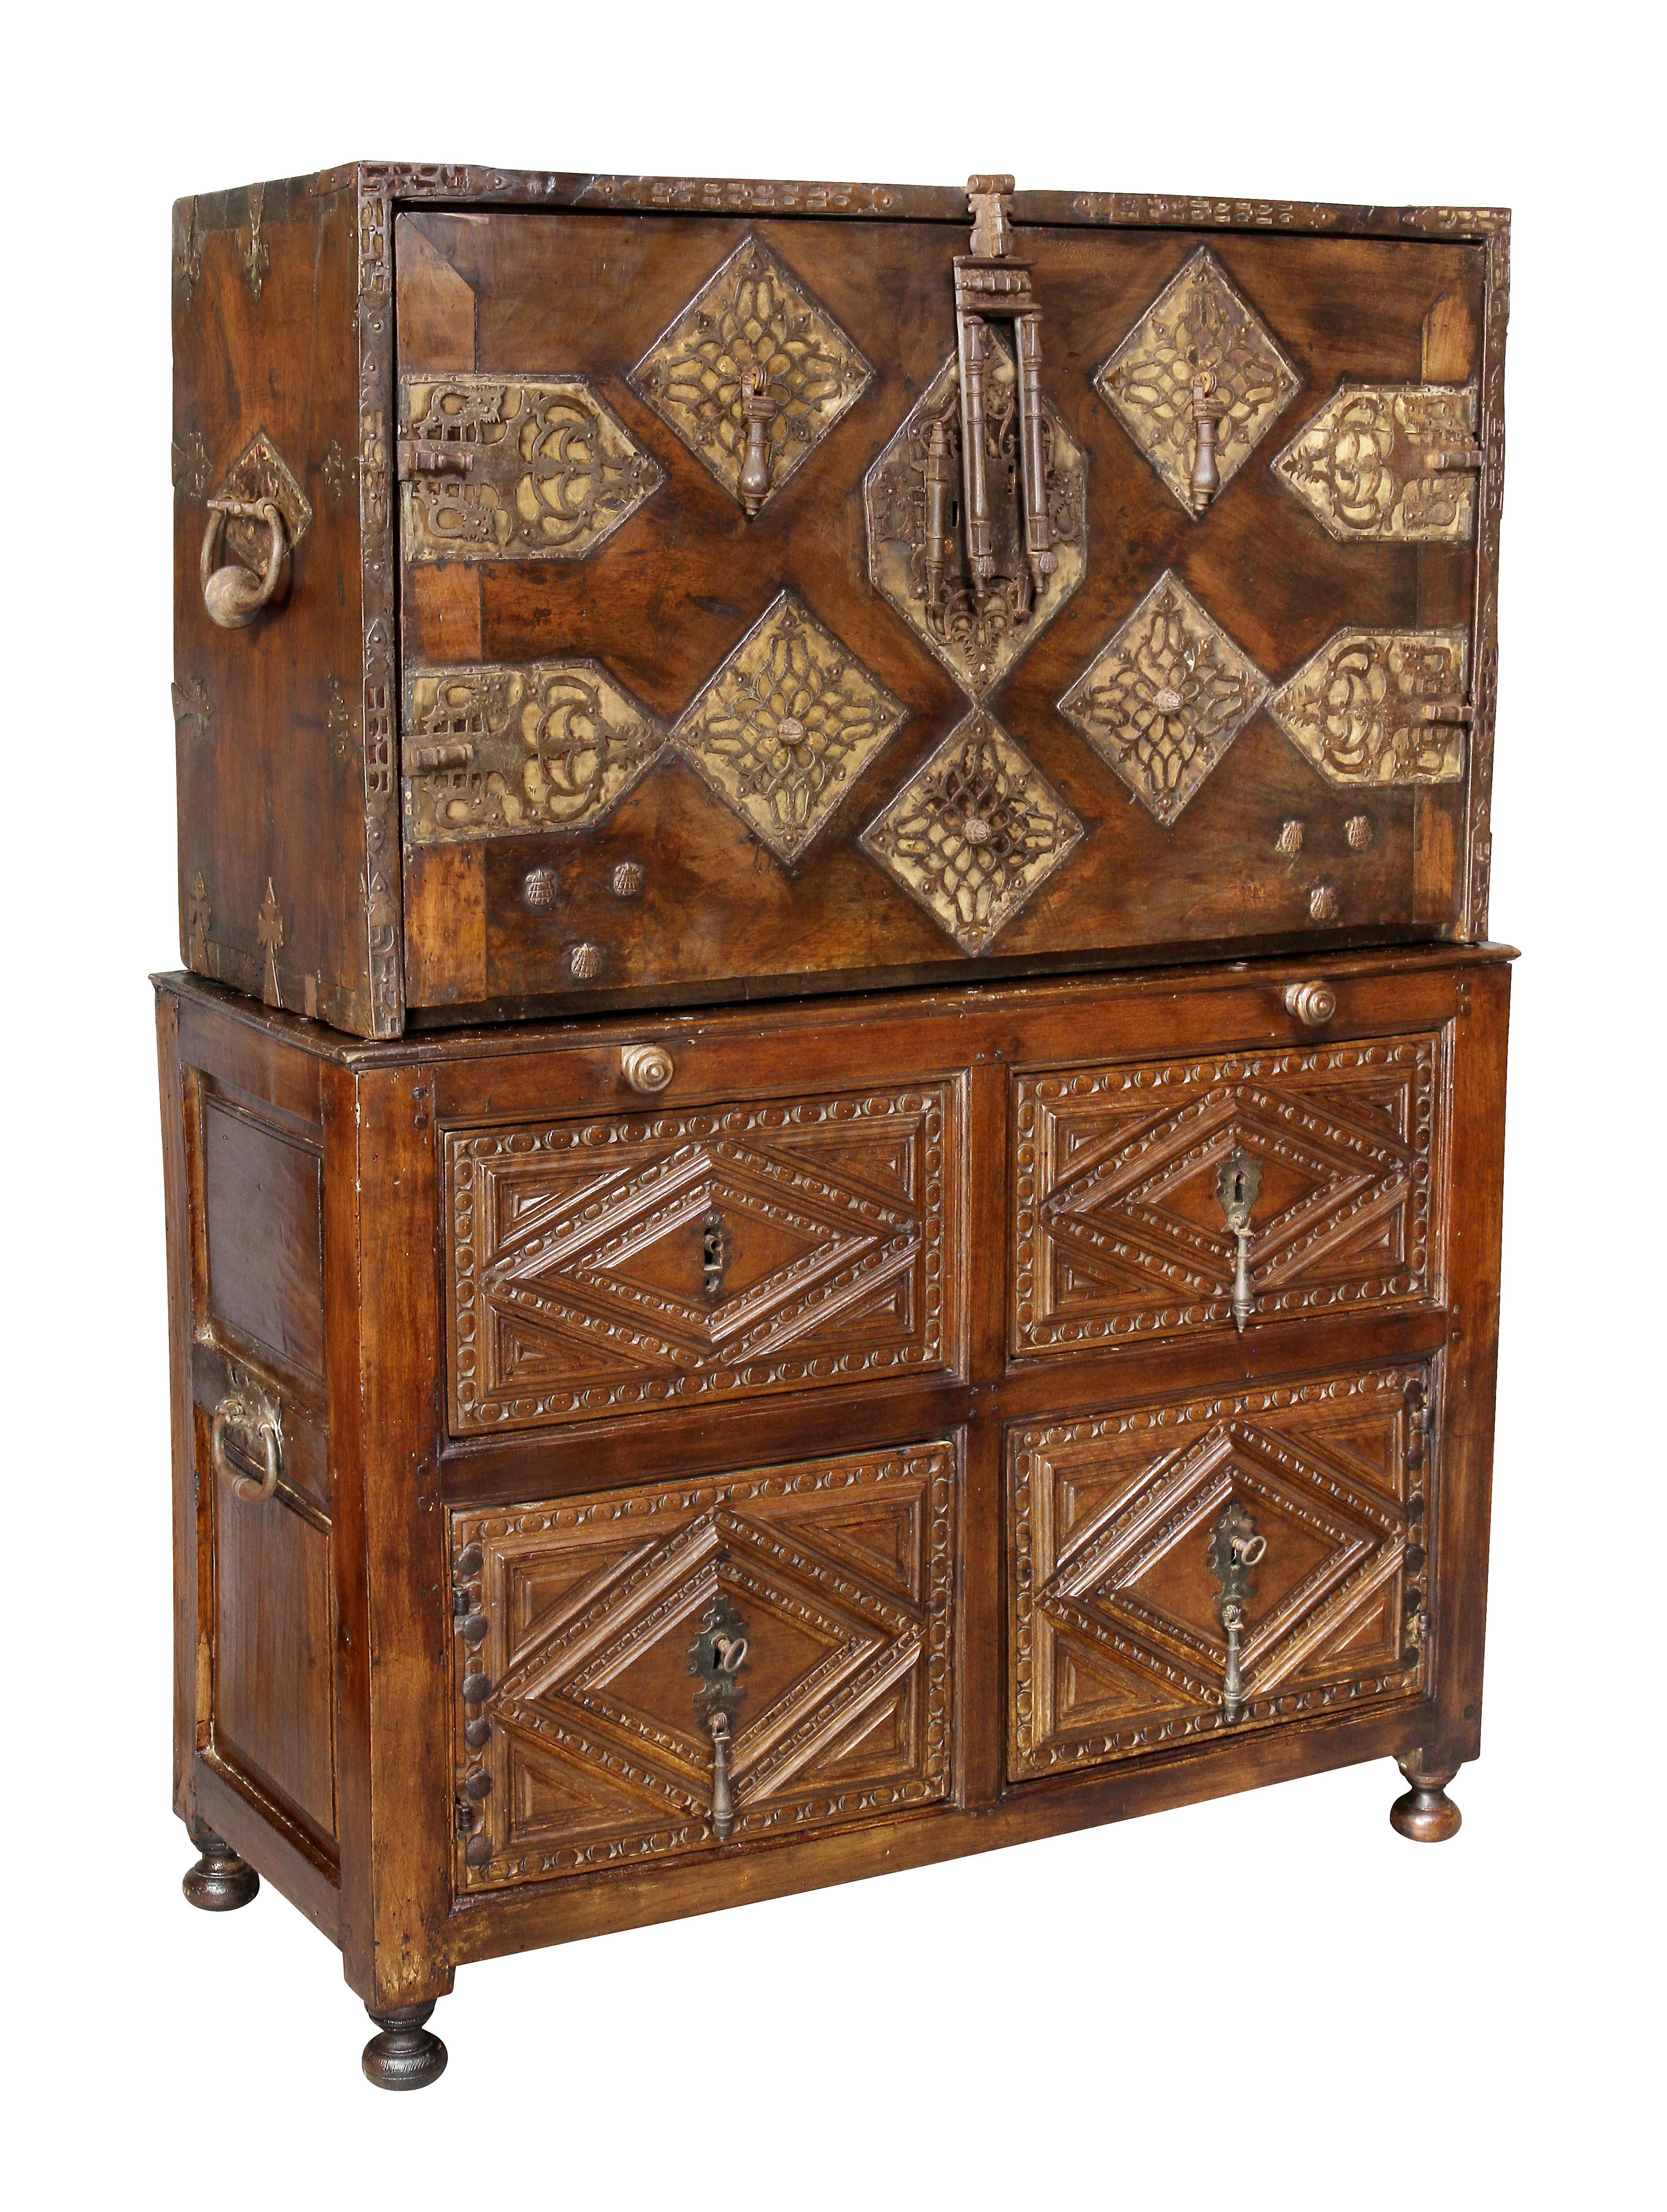 In two parts with upper section with fold down writing lid opening to an elaborately fitted gilded interior with drawers and compartments, the base with geometric panelled drawers, bun feet. Estate of John Volk, noted Palm Beach architect.